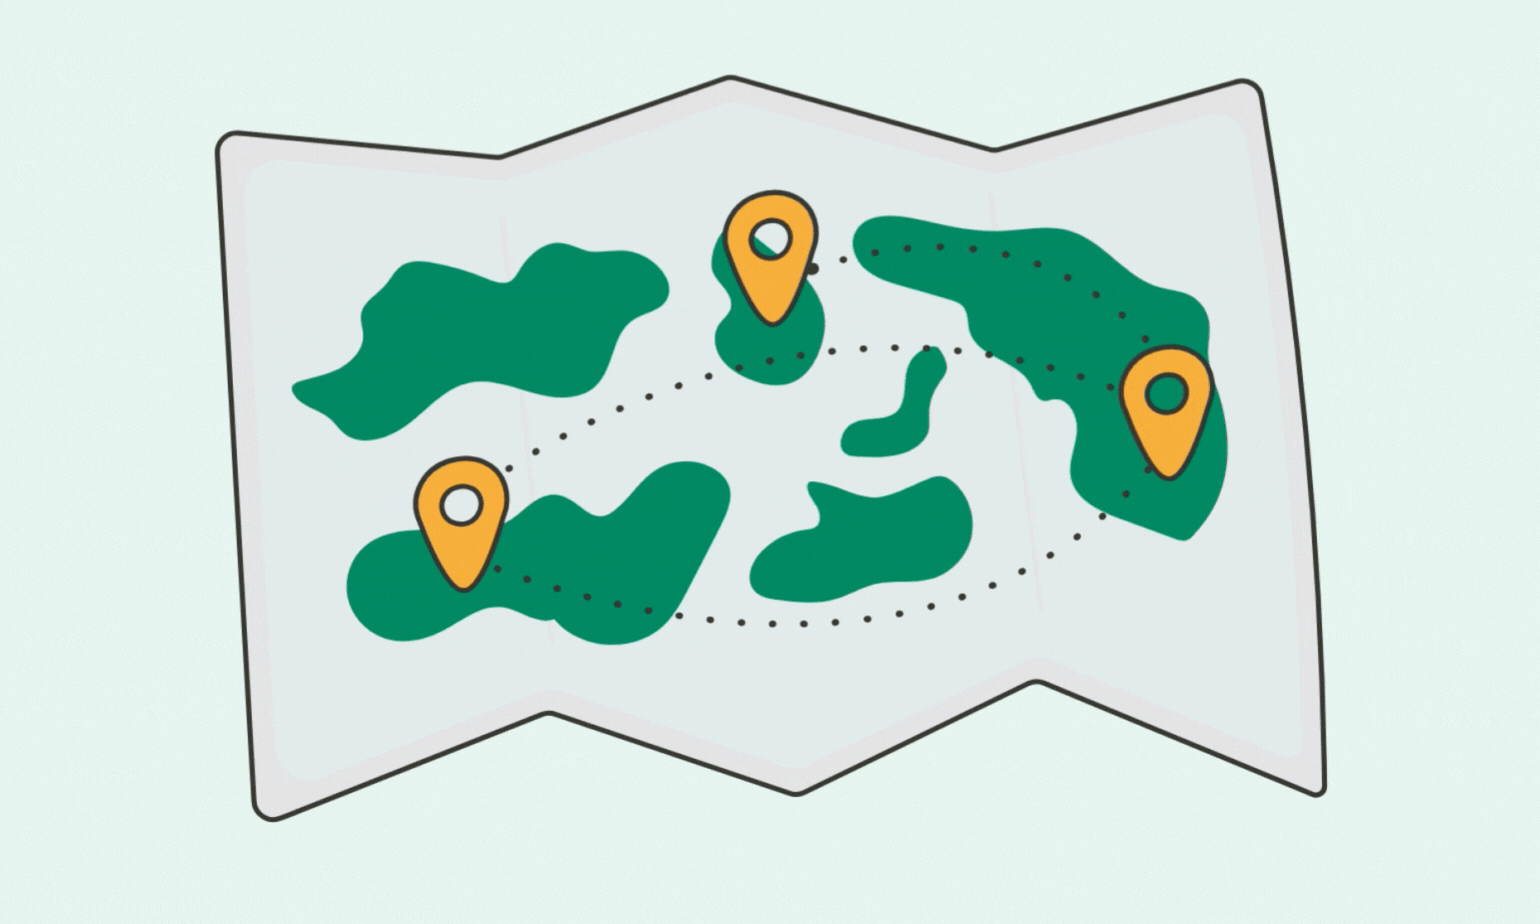 2D animation of an illustrated map with three marked waypoints at different locations.